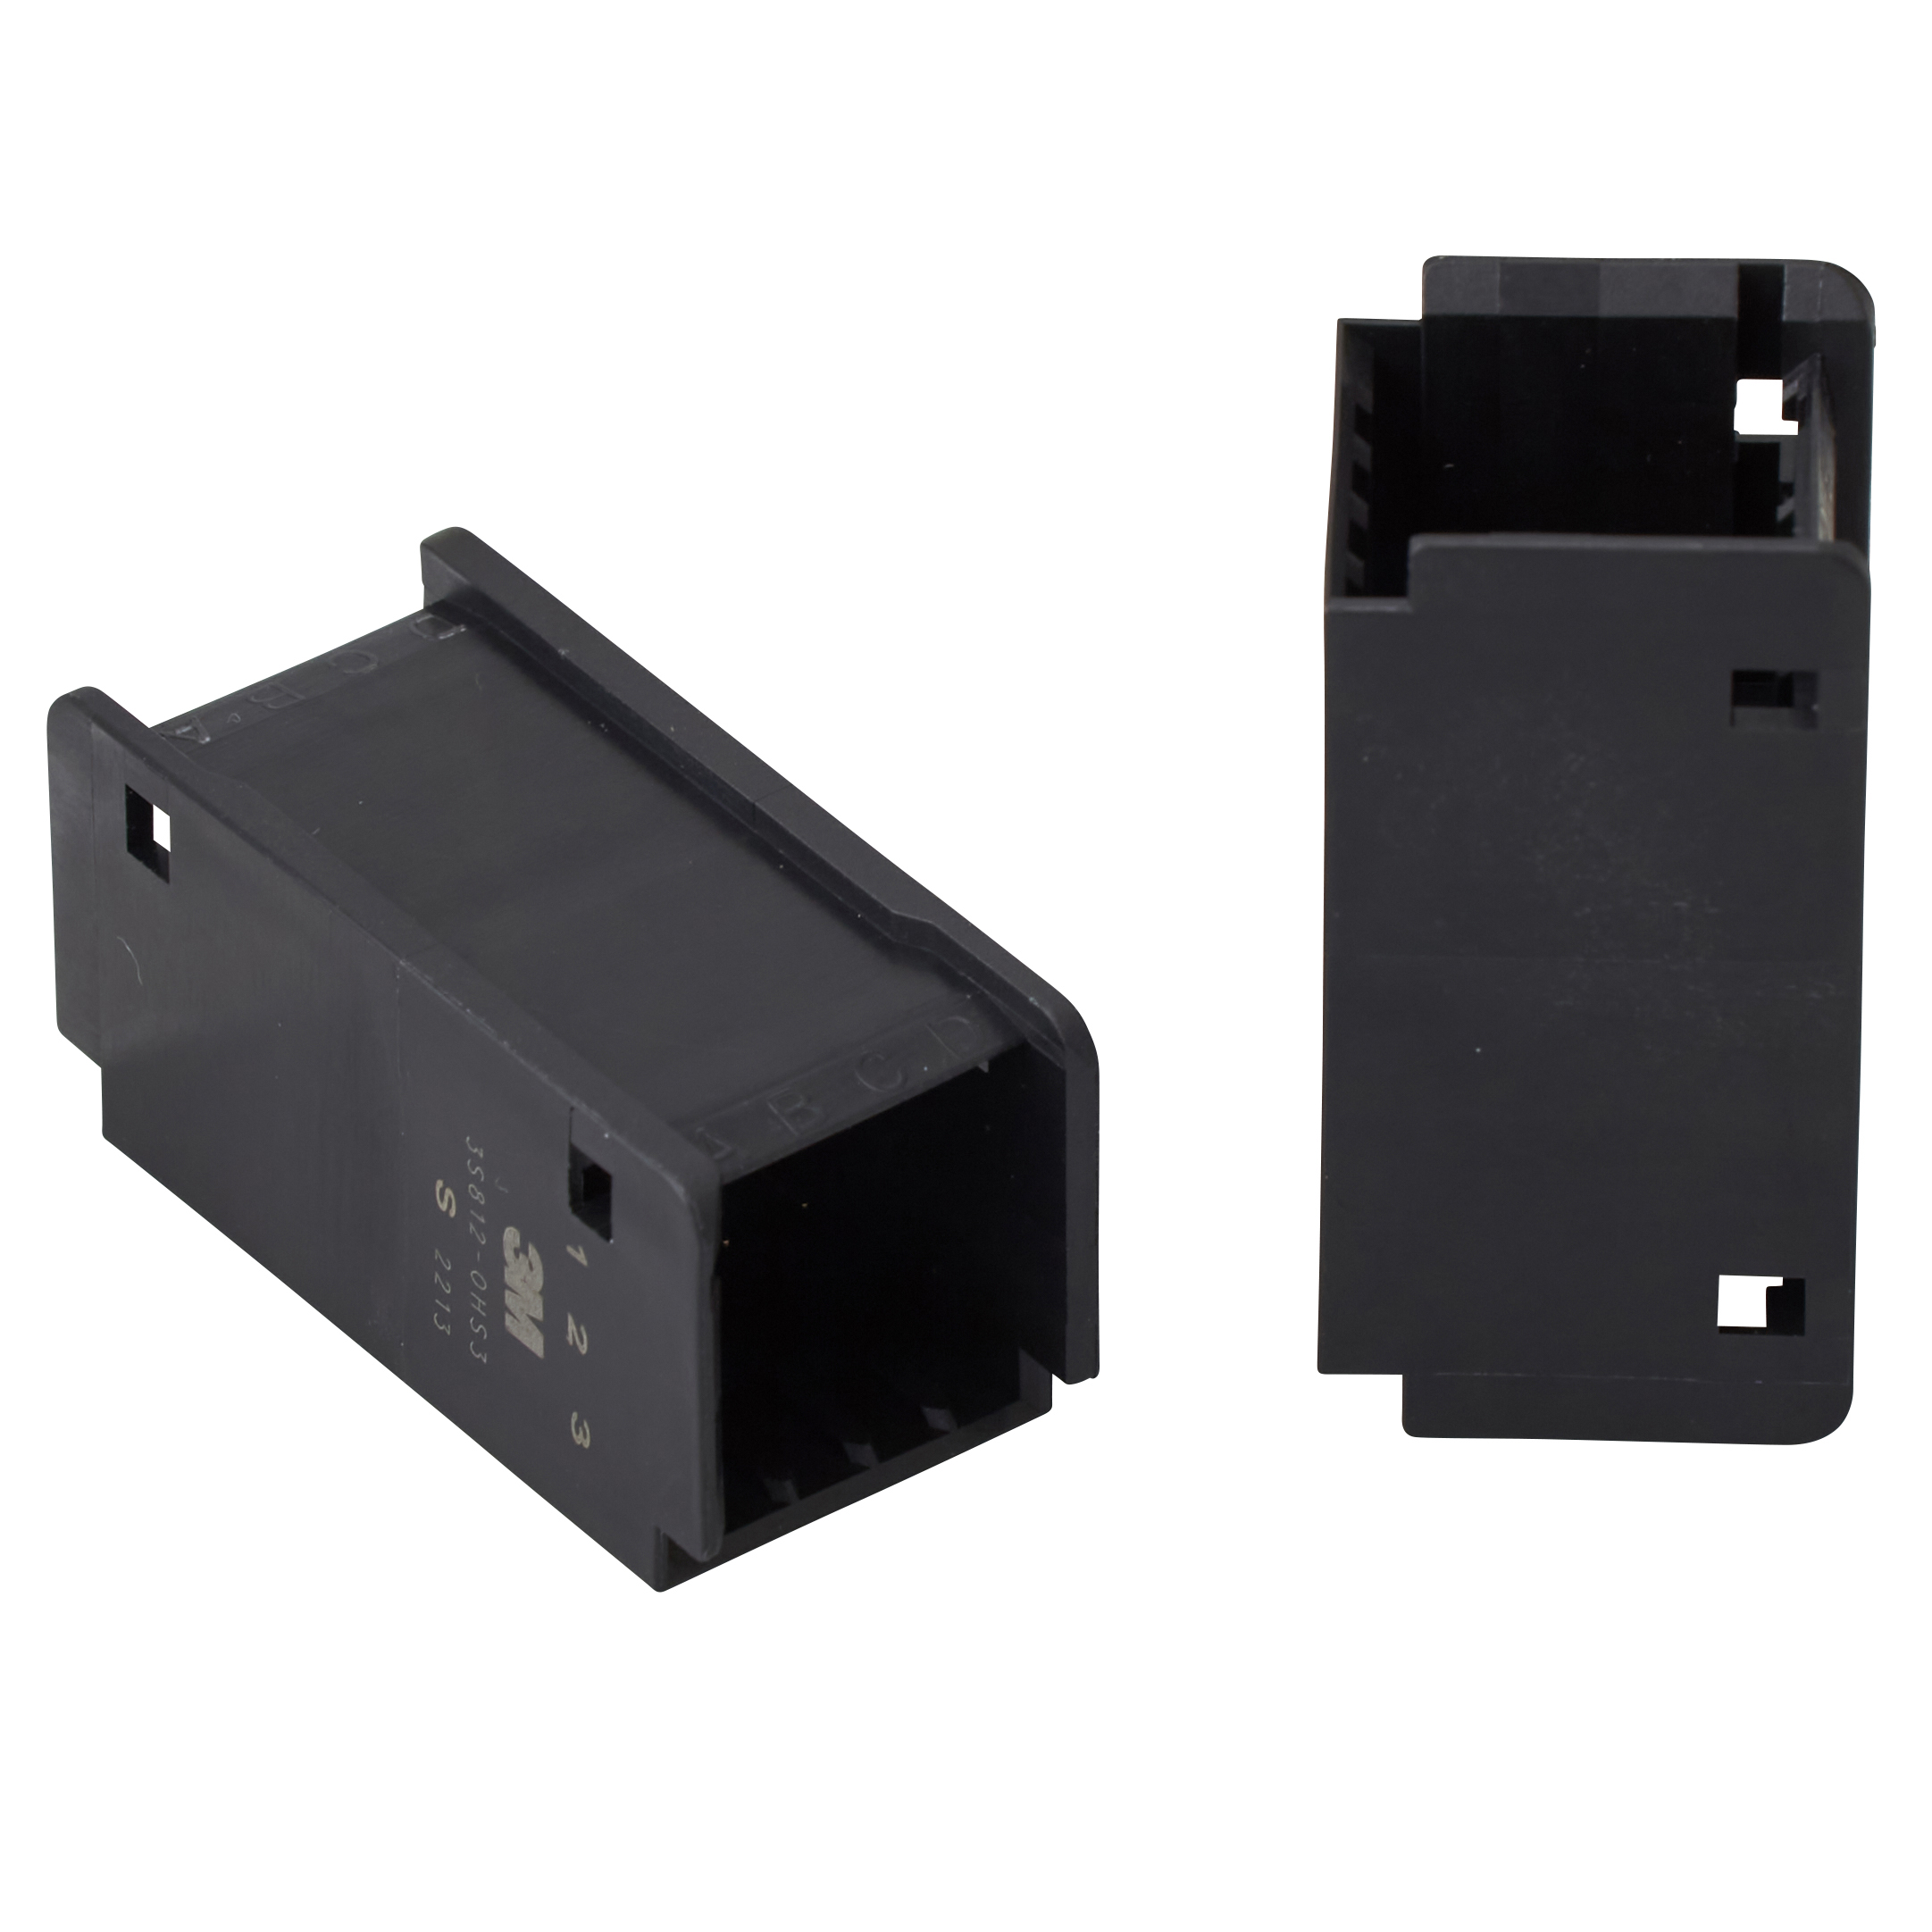 【3S812-0HS3-B00 PS】MINI STACK CONNECTOR JUNCTION HE